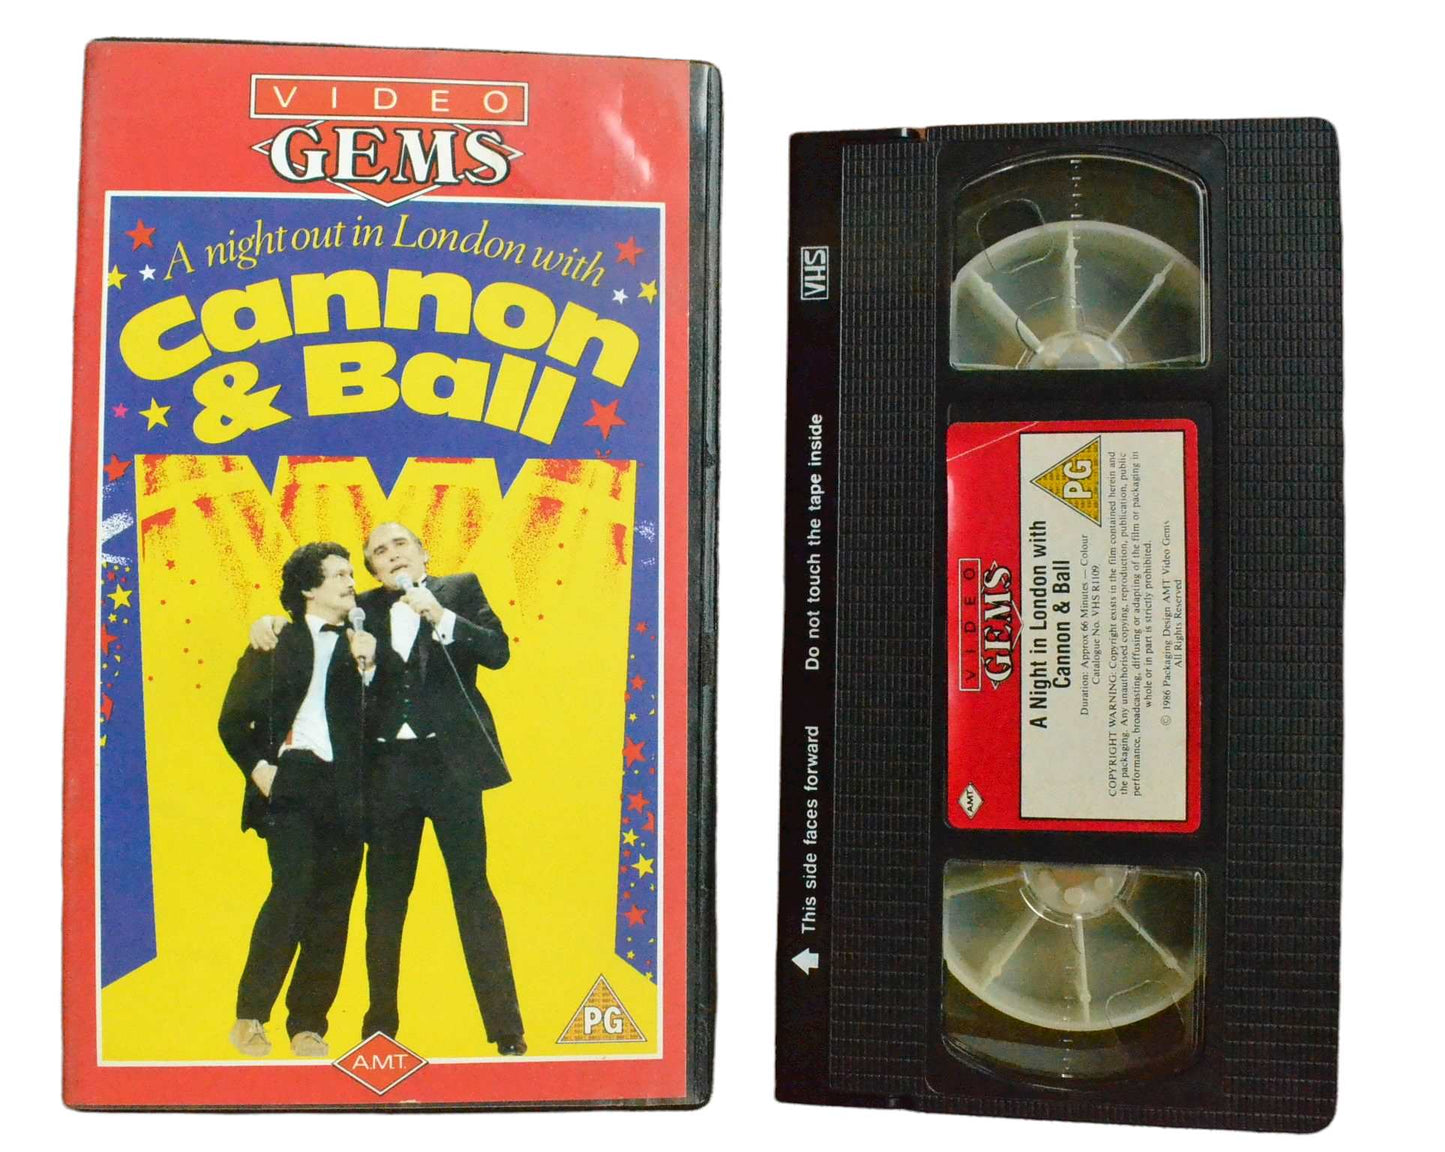 A Night Out in London with Cannon & Ball - Tommy Cannon - Video Gems - Vintage - Pal VHS-